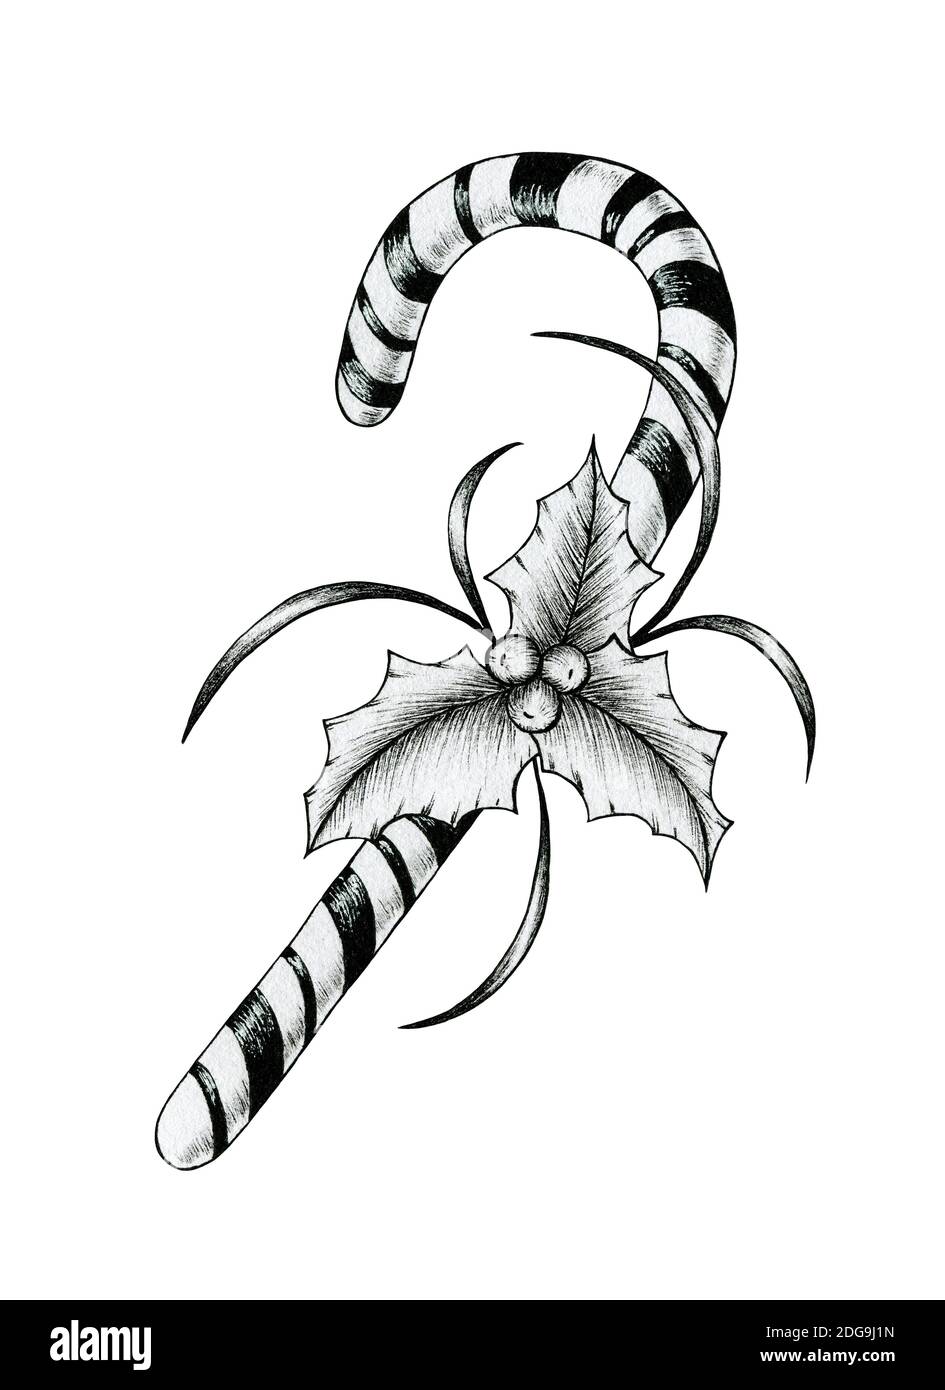 Christmas candy cane sketch isolated on white, vintage Christmas candy cane  decorated with holly and berries, black and white Christmas decoration  Stock Photo - Alamy